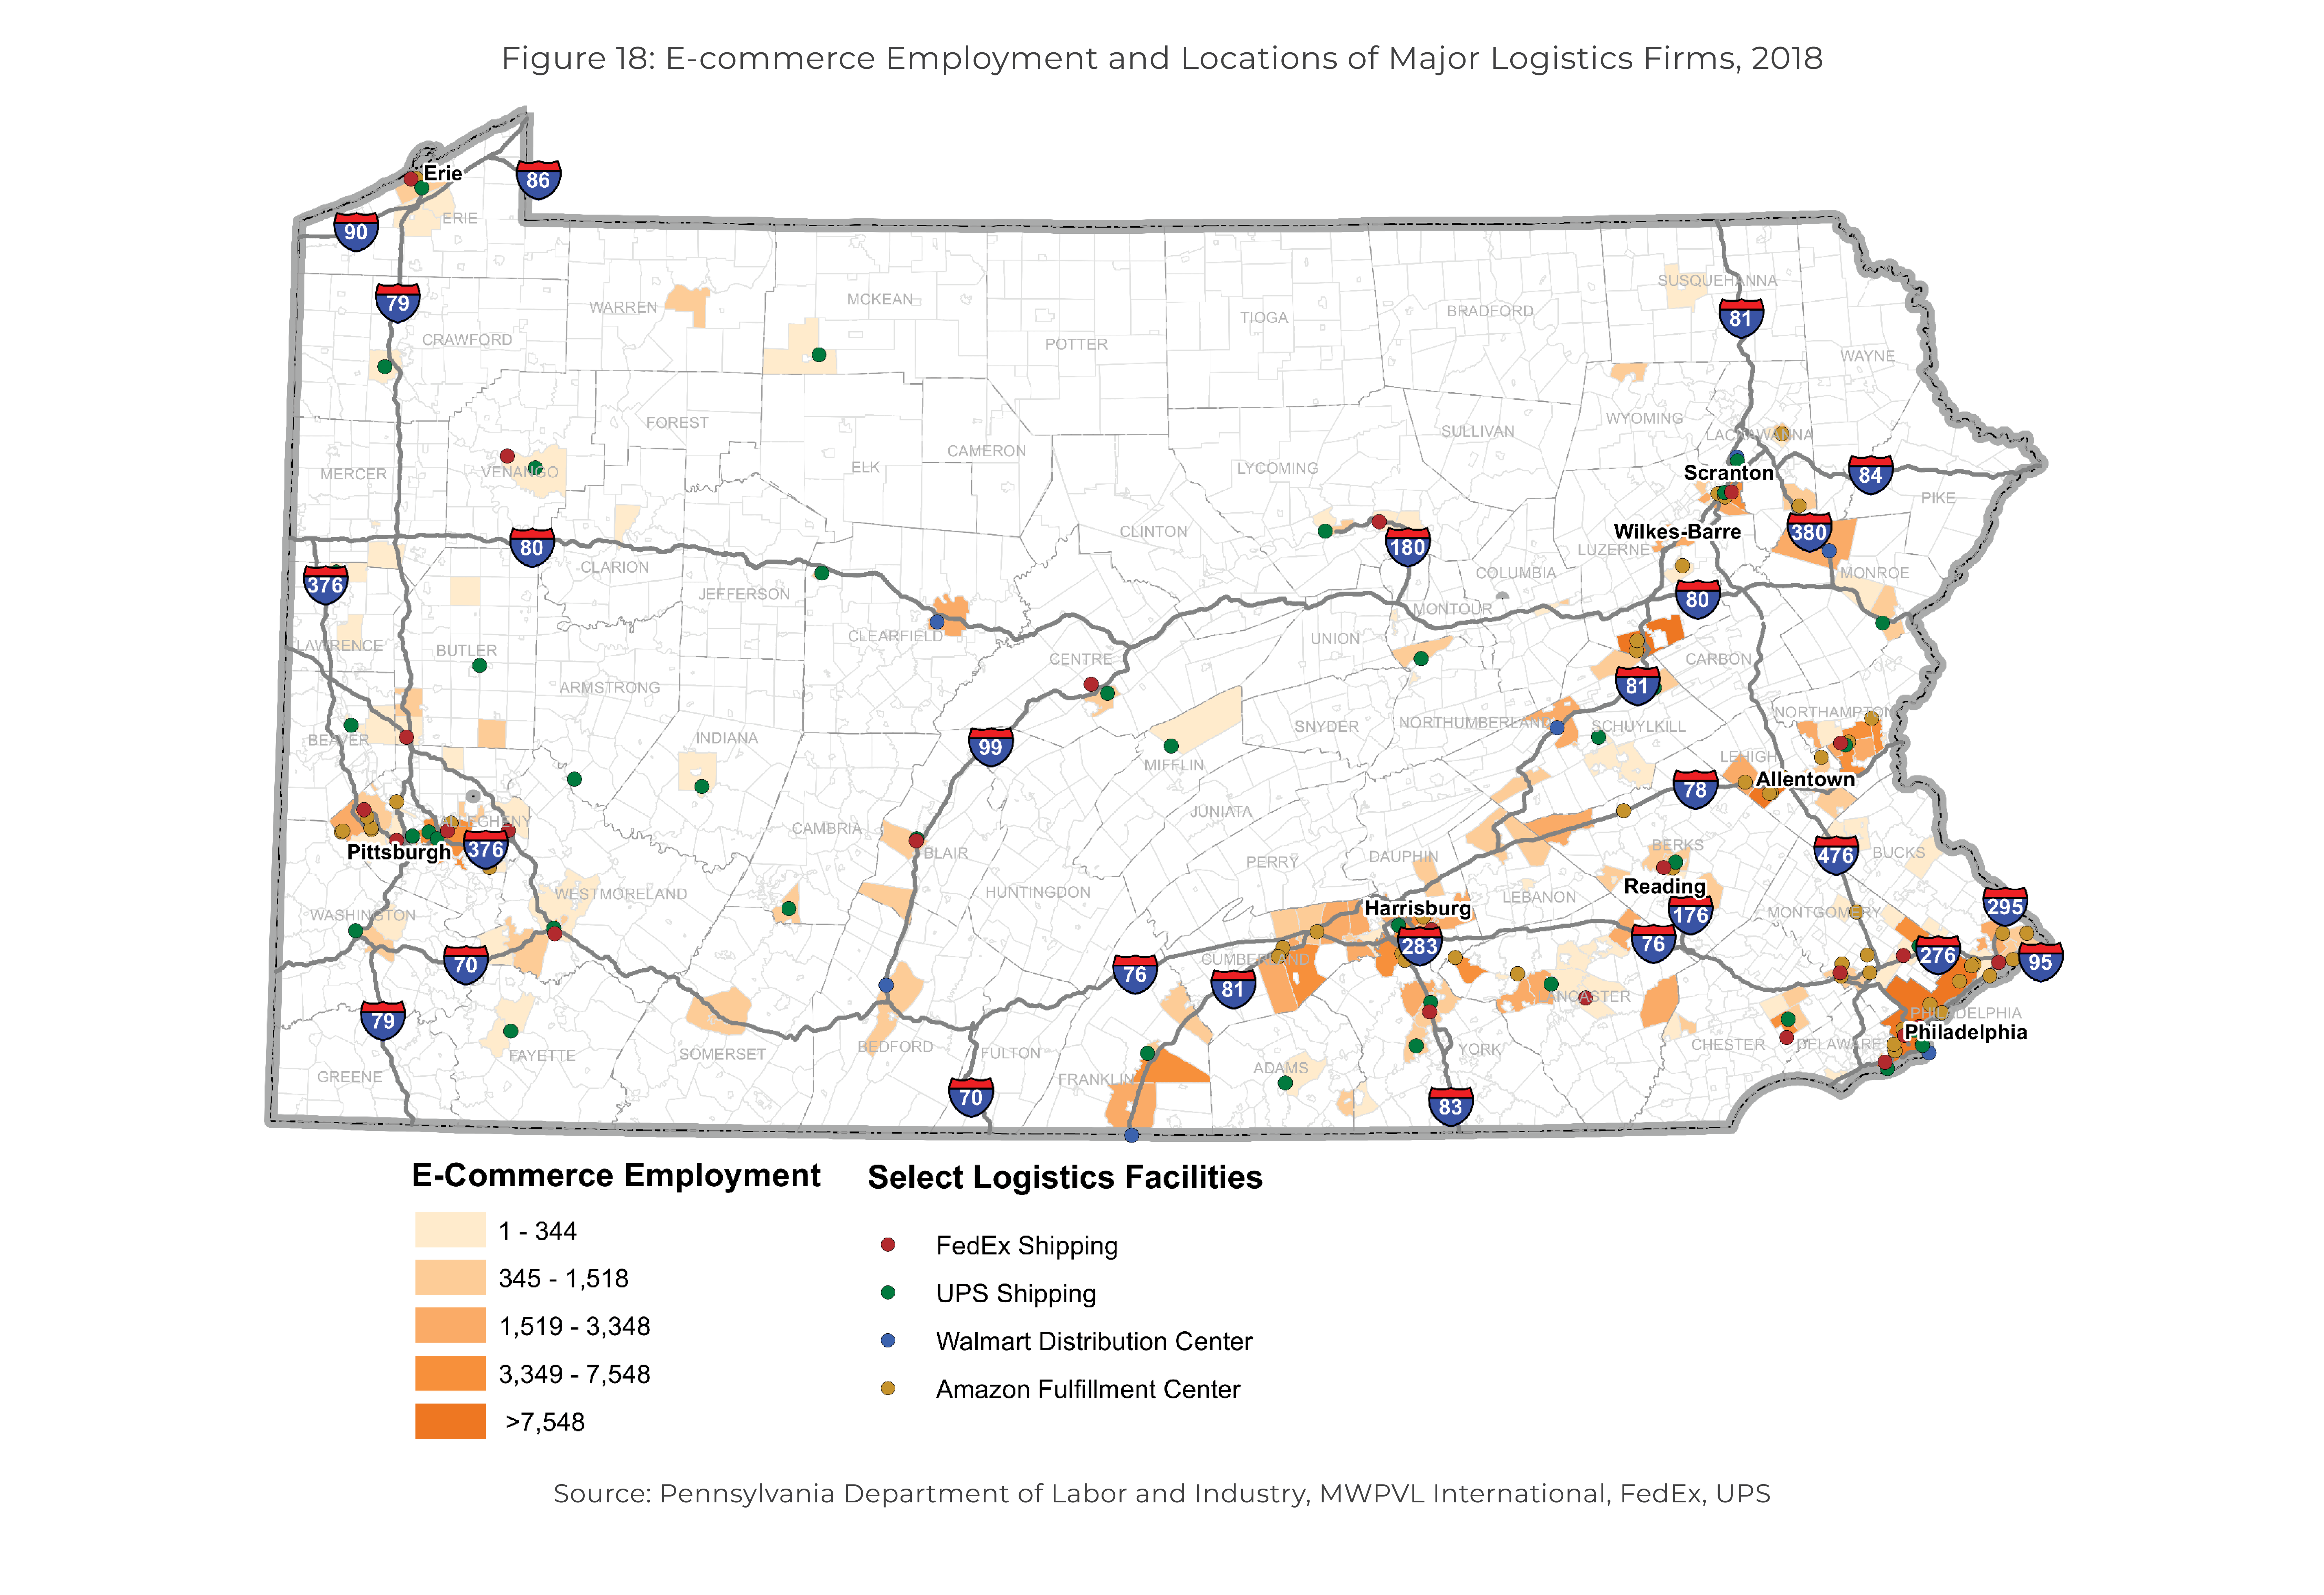 Figure 18 is a Pennsylvania state map illustrating e-commerce employment by municipality and the location of select logistics facilities, including FedEx Shipping, UPS Shipping, Walmart Distribution, and Amazon Fulfillment.